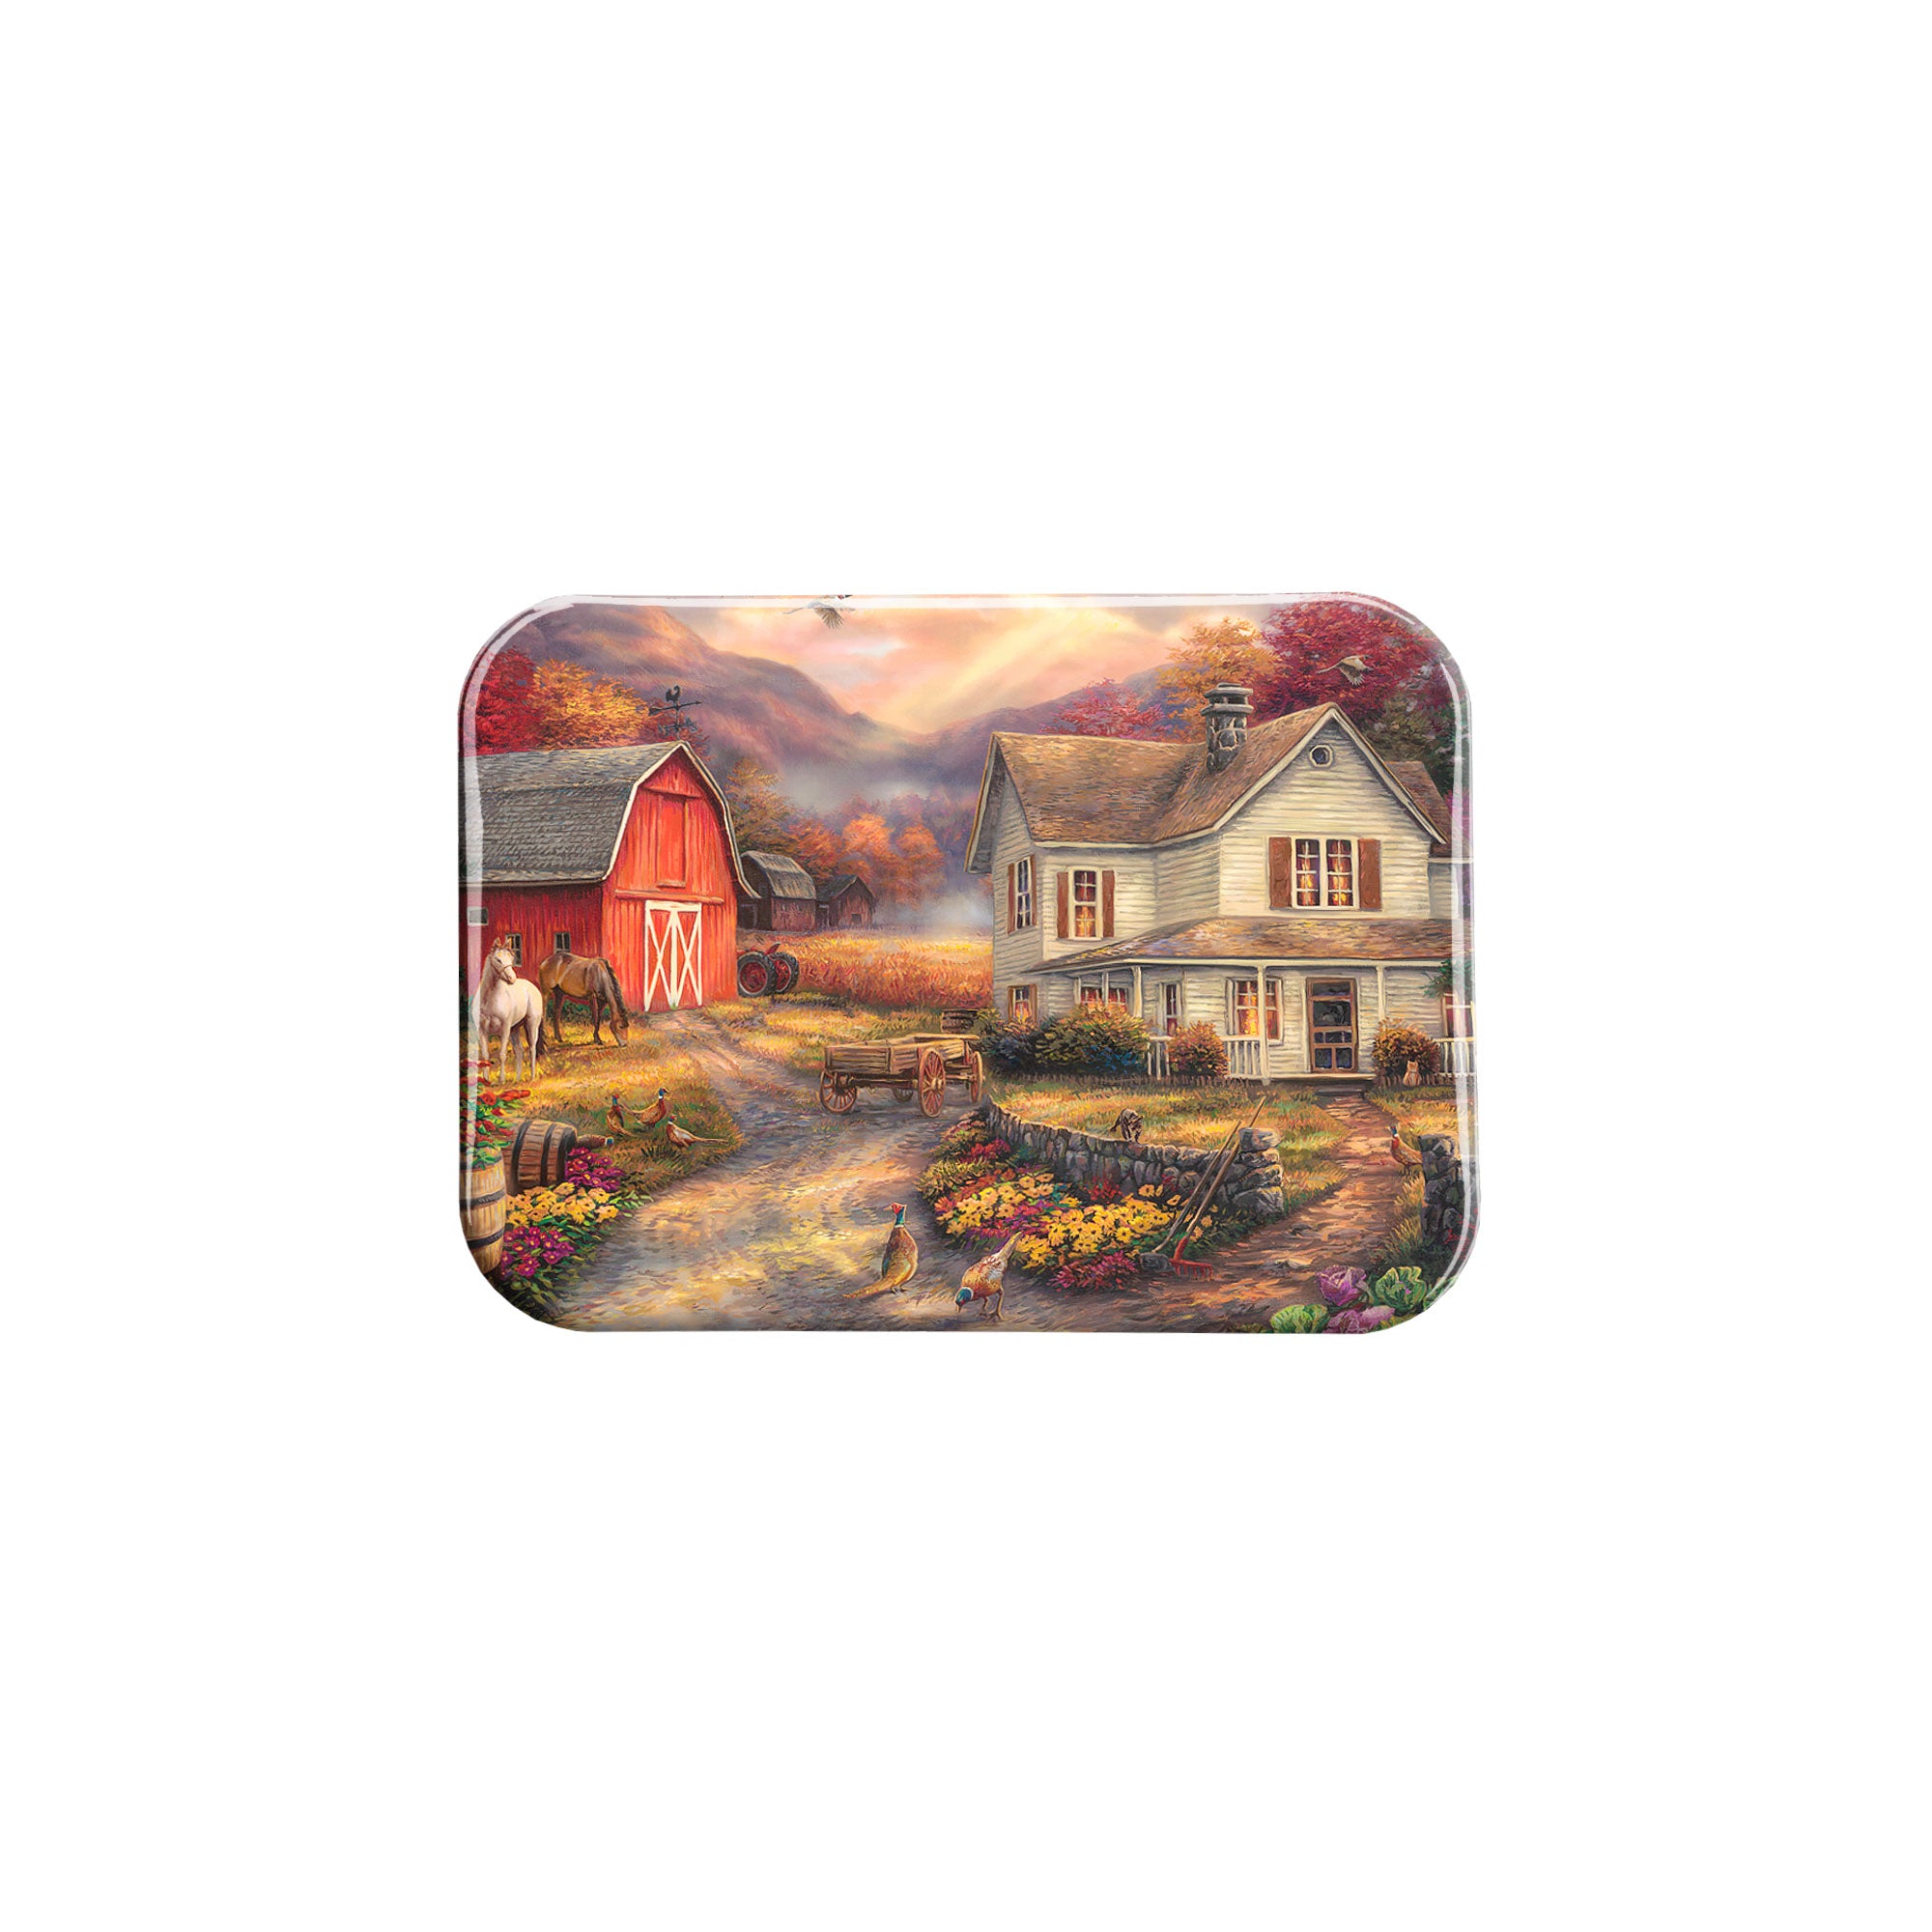 "Relaxing On The Farm" - 2.5" X 3.5" Rectangle Fridge Magnets